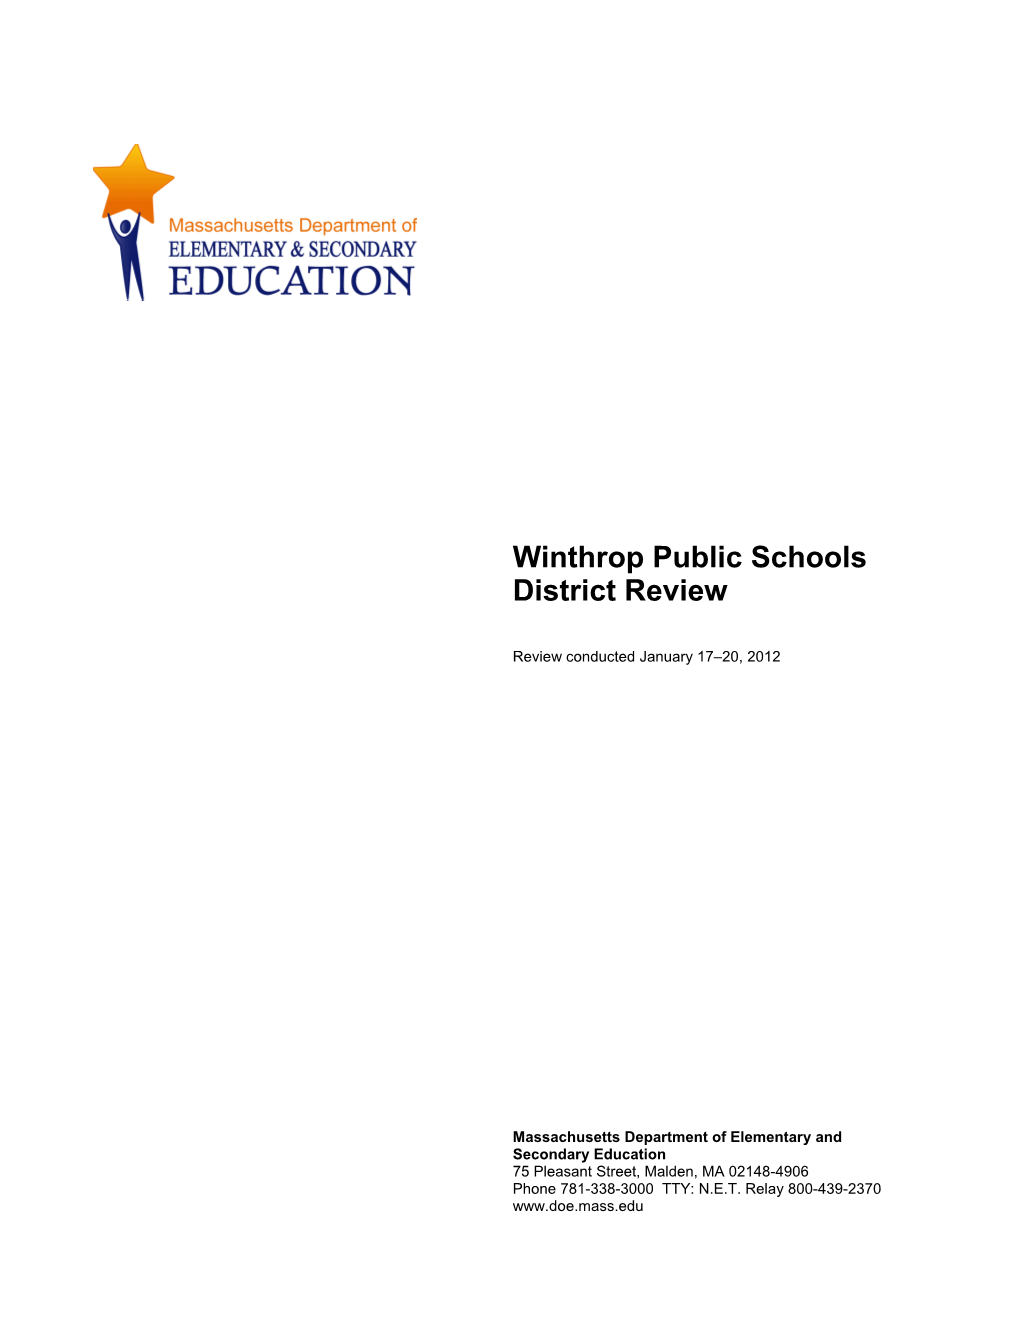 Winthrop District Review Report, 2012 Onsite